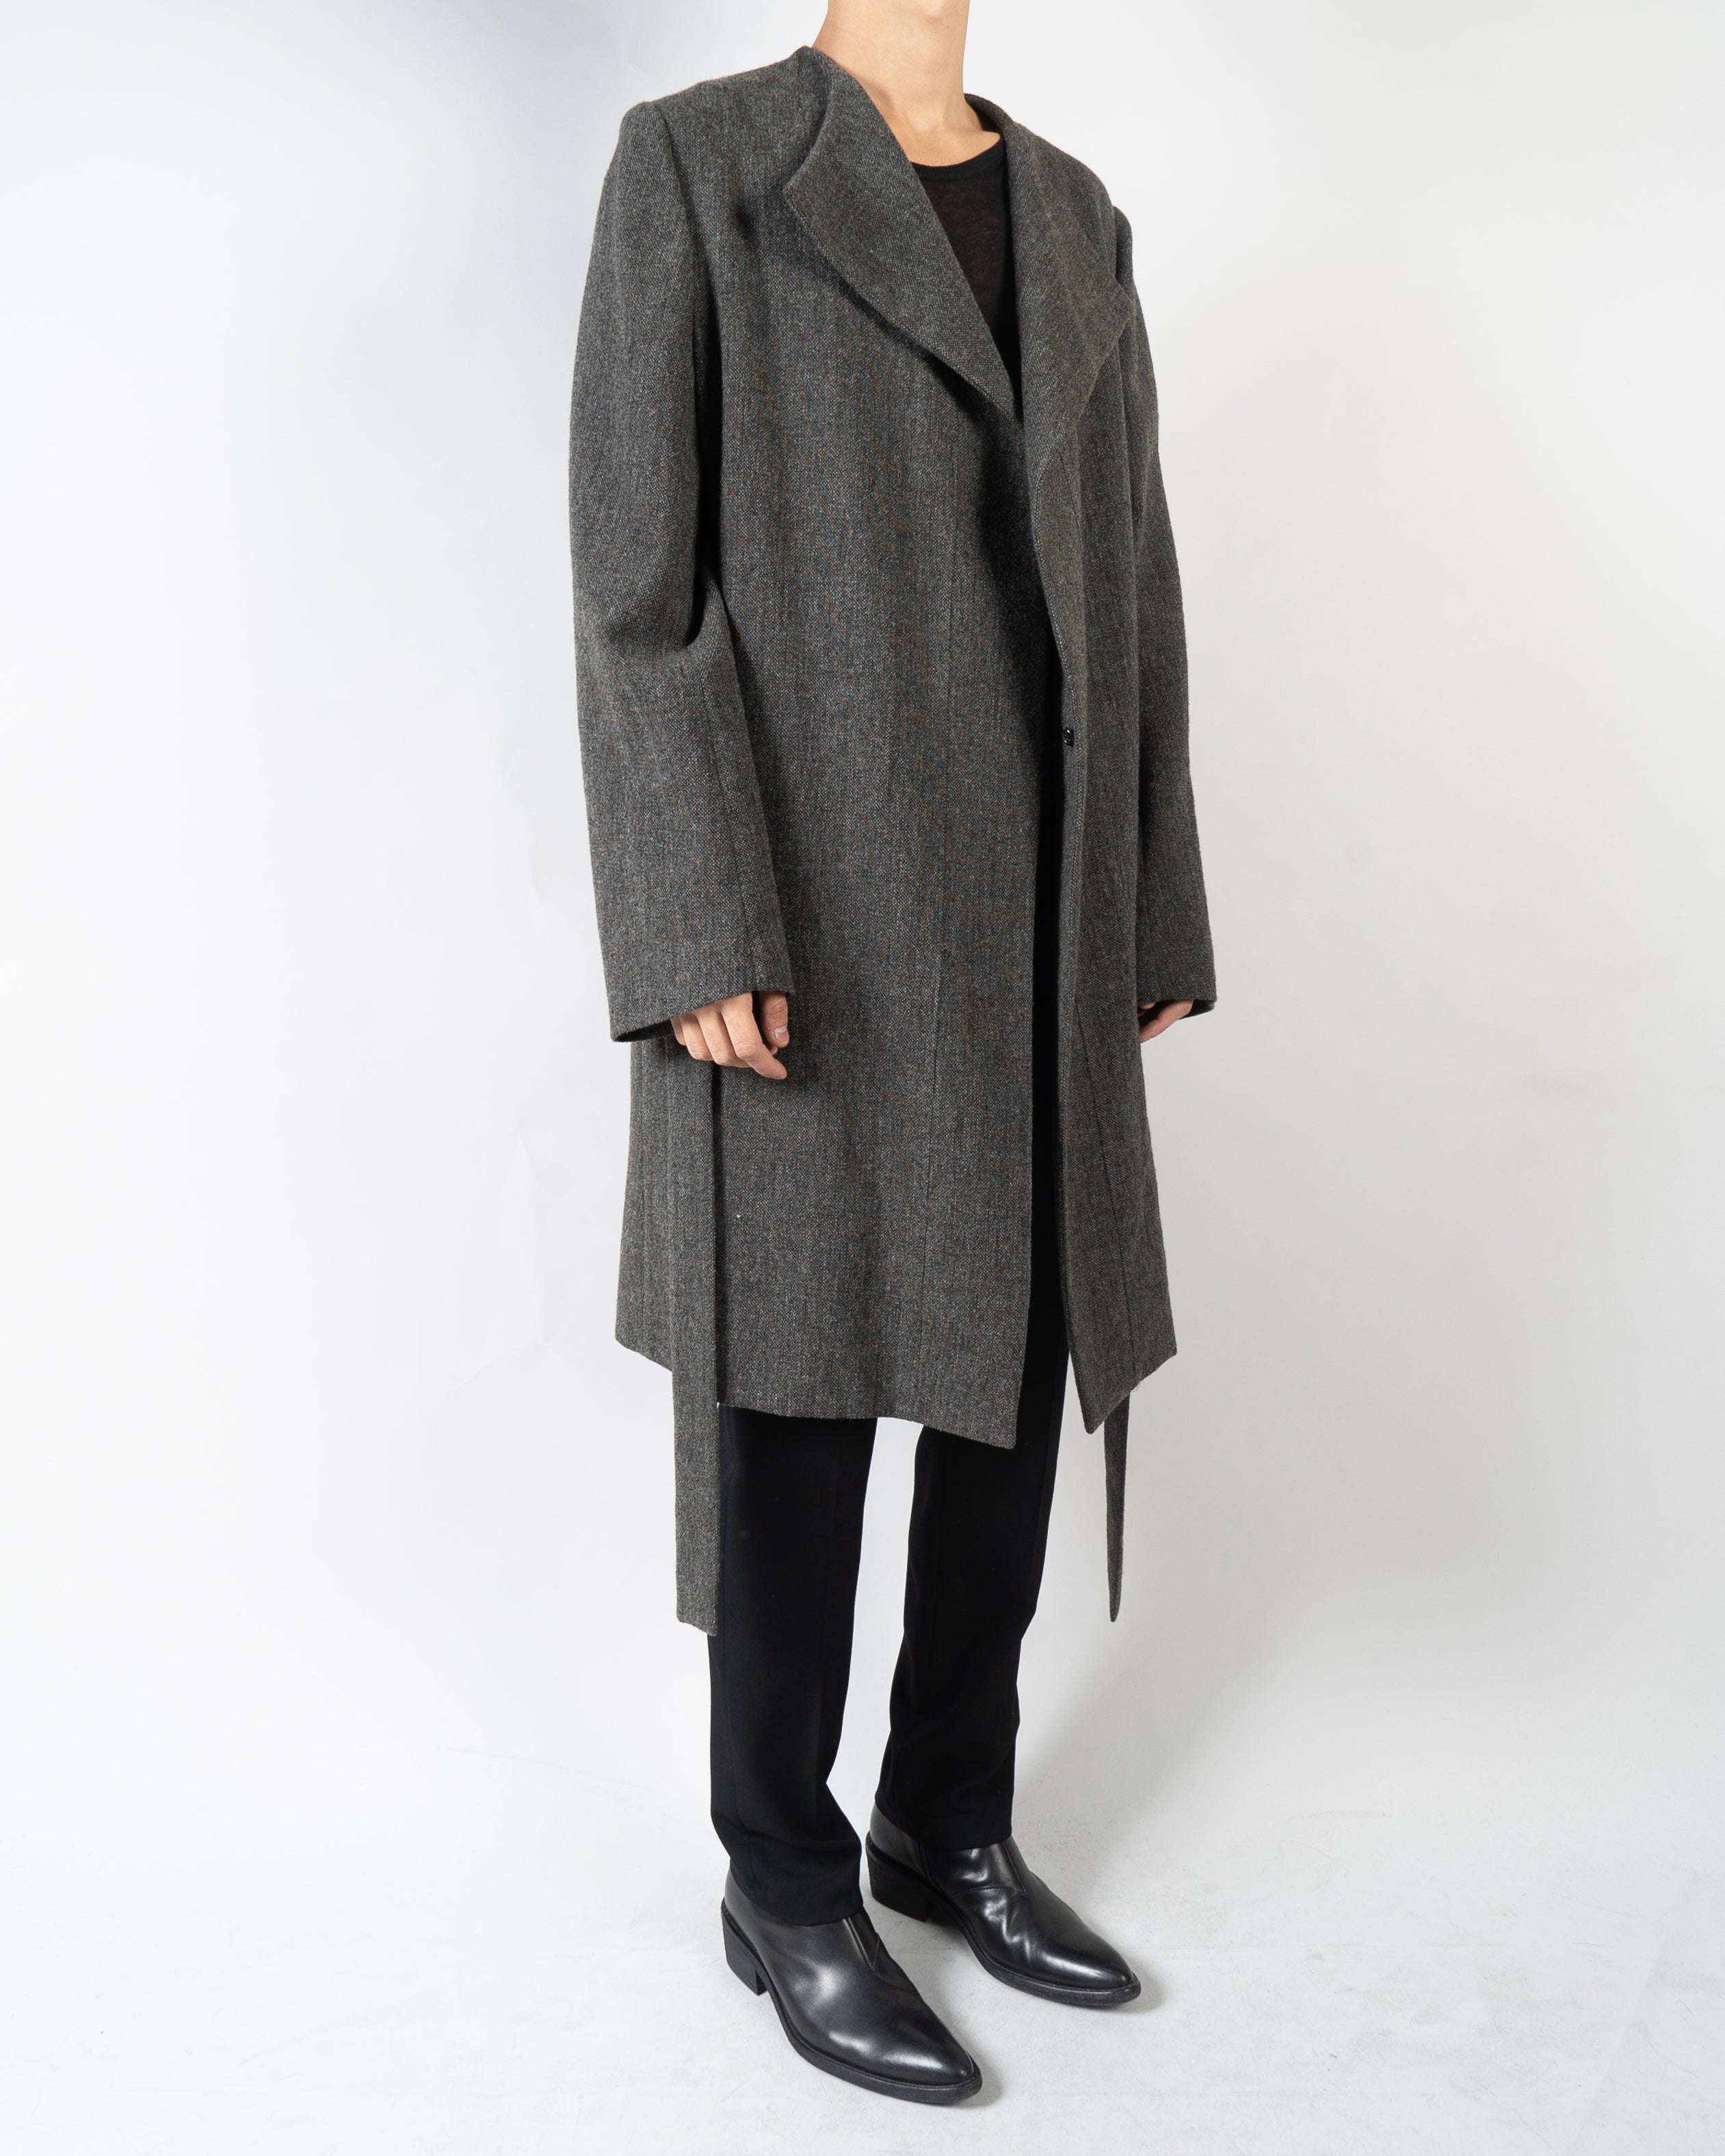 FW06 Anthracite Belted Wool Coat Sample